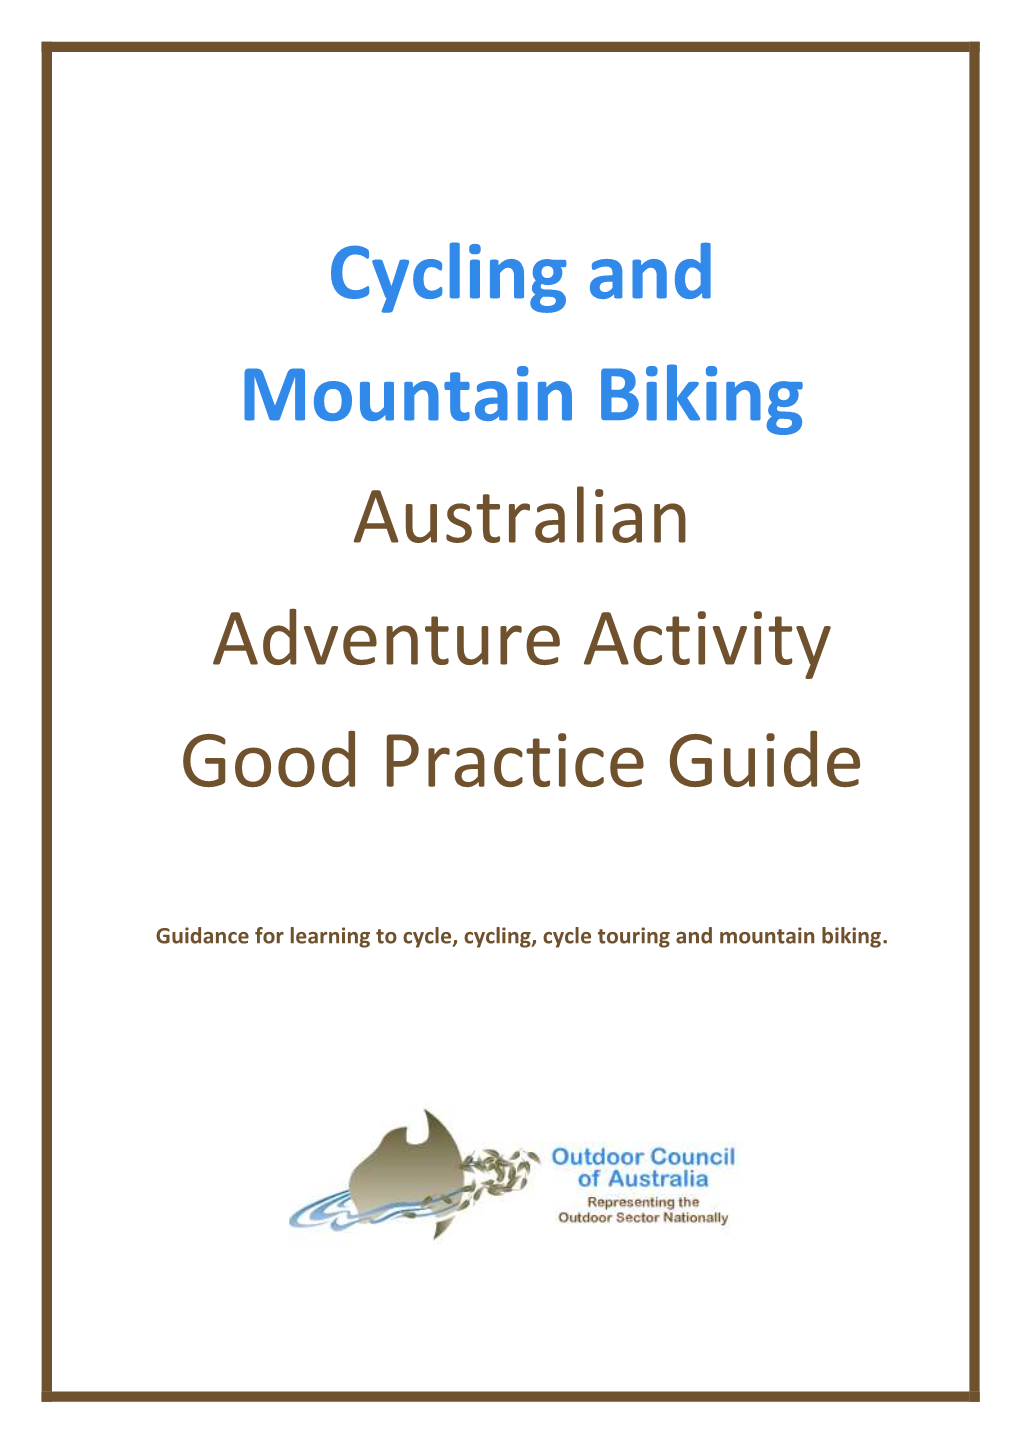 Cycling and Mountain Biking Australian Adventure Activity Good Practice Guide